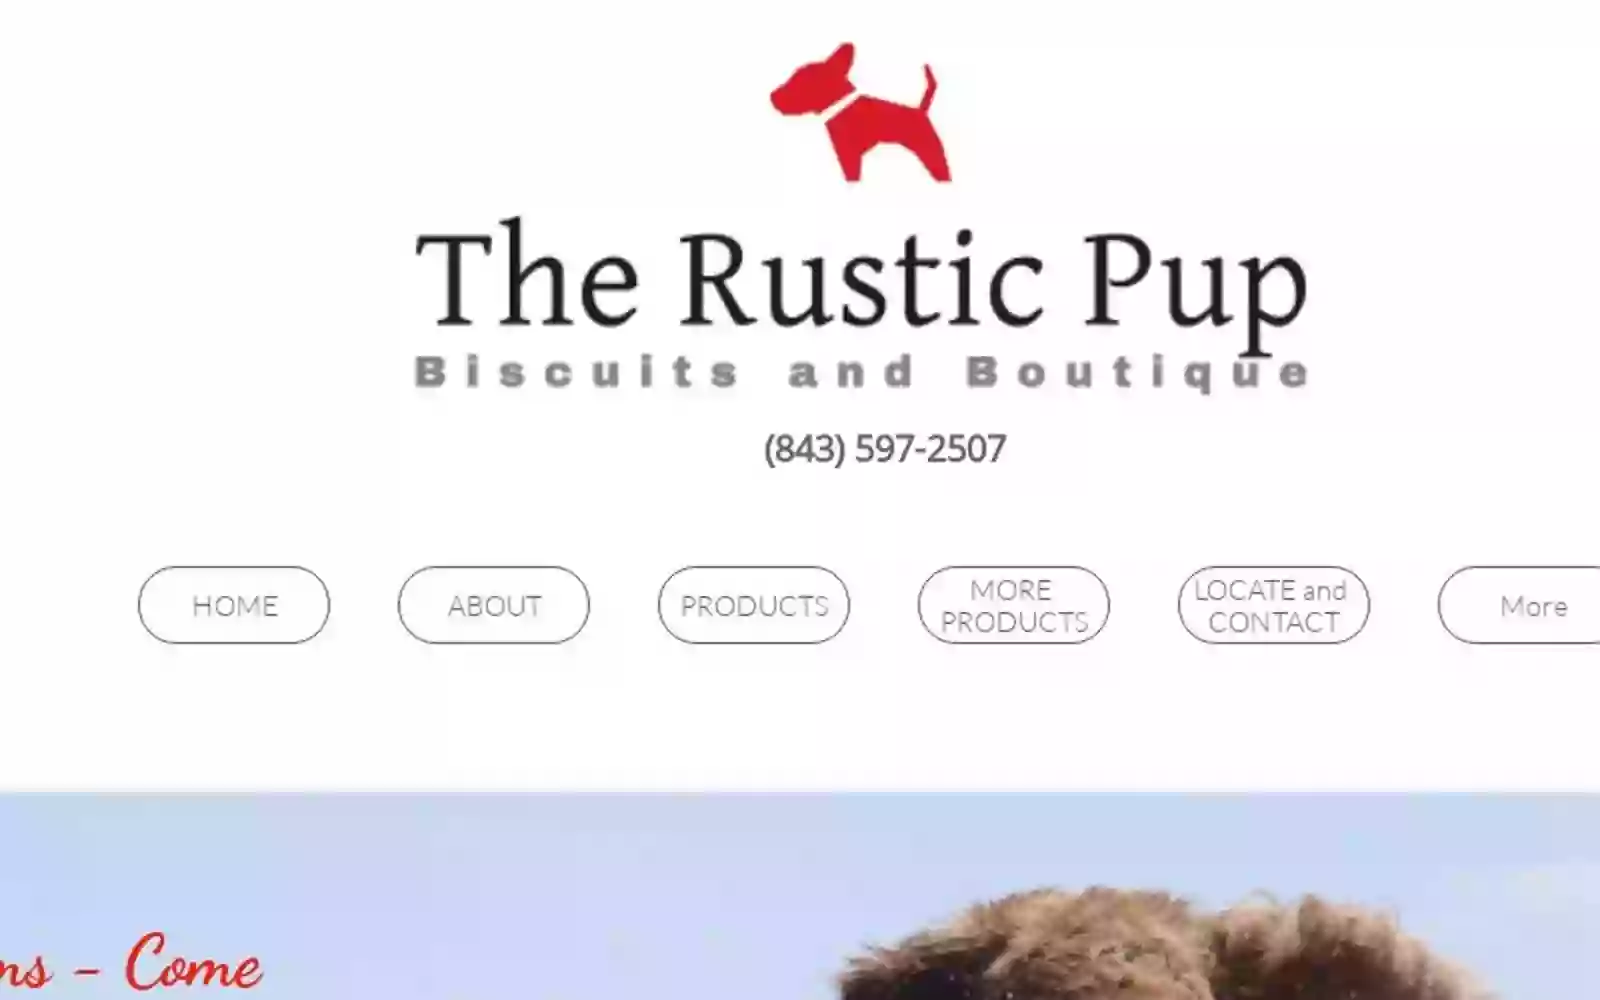 The Rustic Pup Biscuits & Boutique